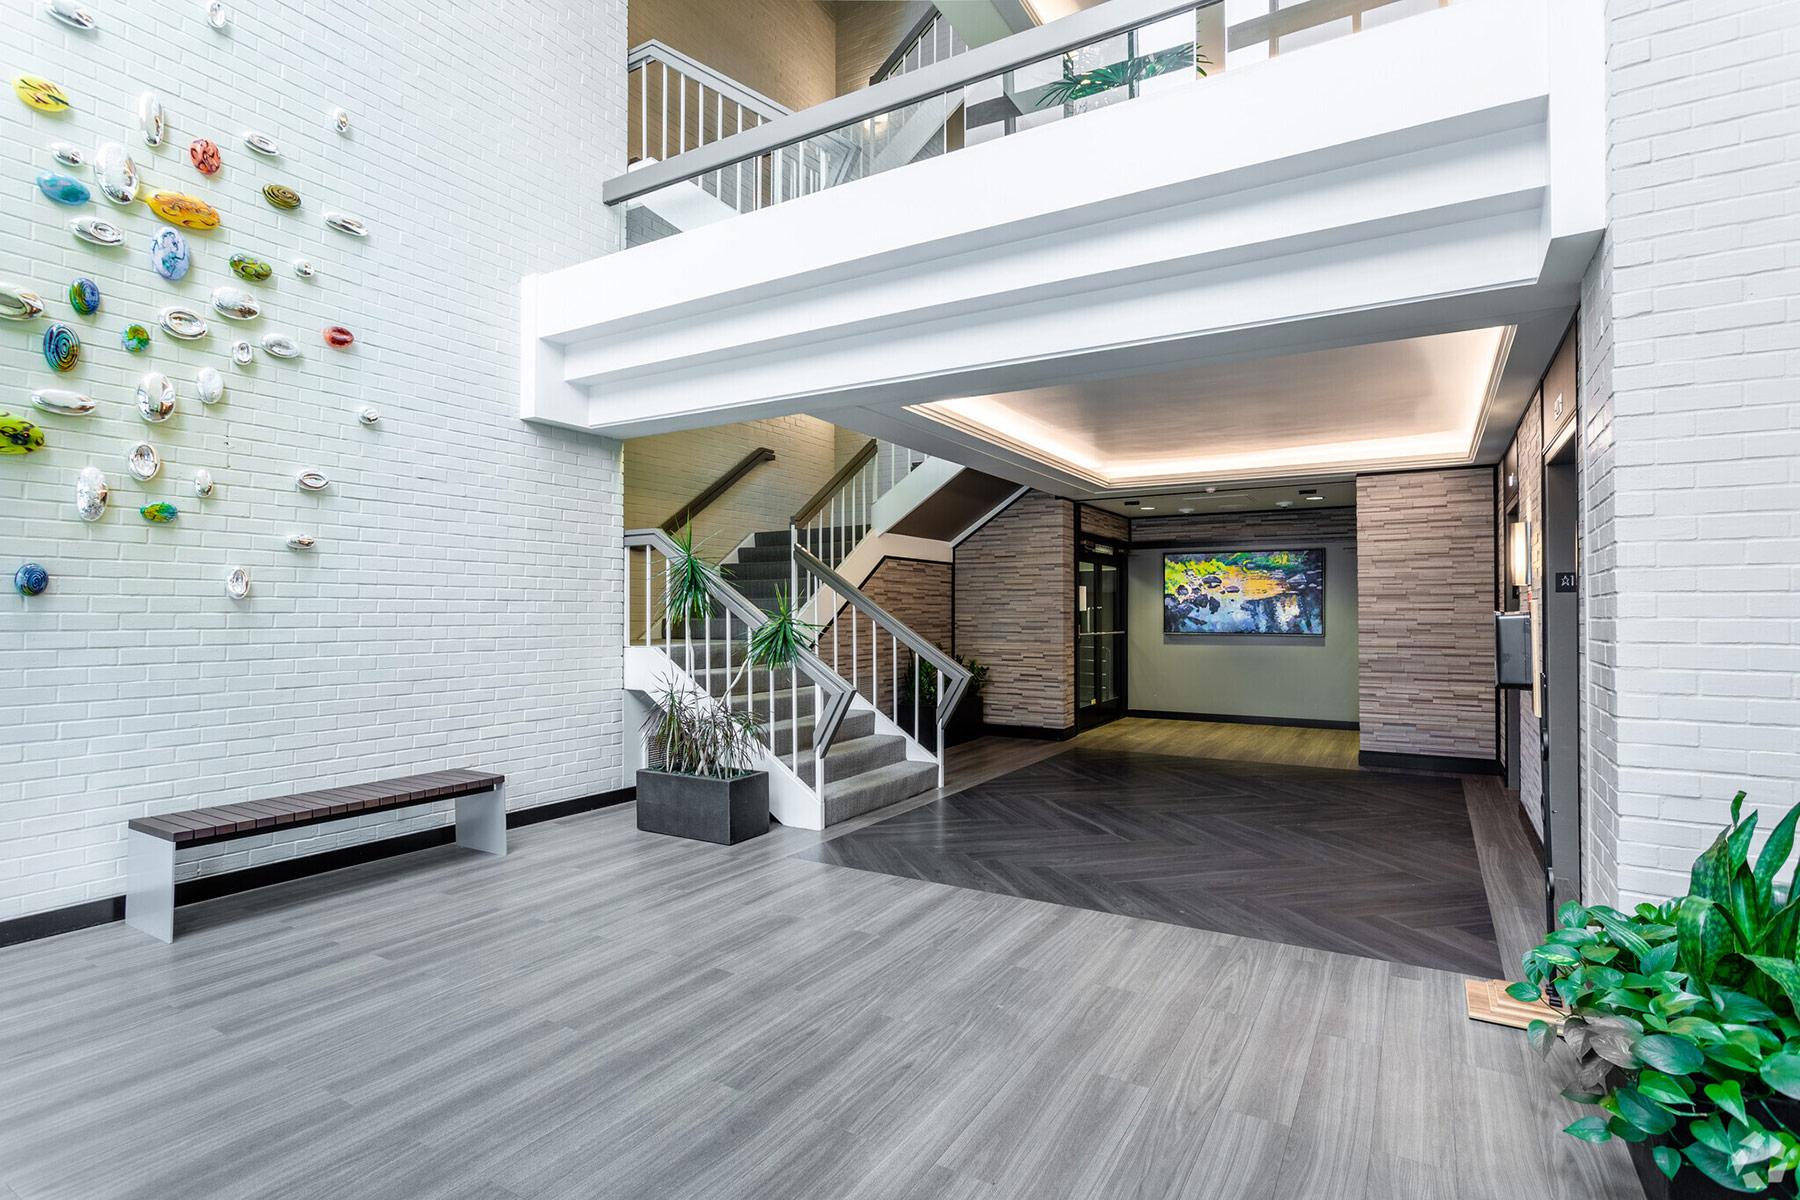 Atrium West lobby with bright white surfaces, natural stone finishes, live plants, and paintings and modern glass art on the white painted brick wall